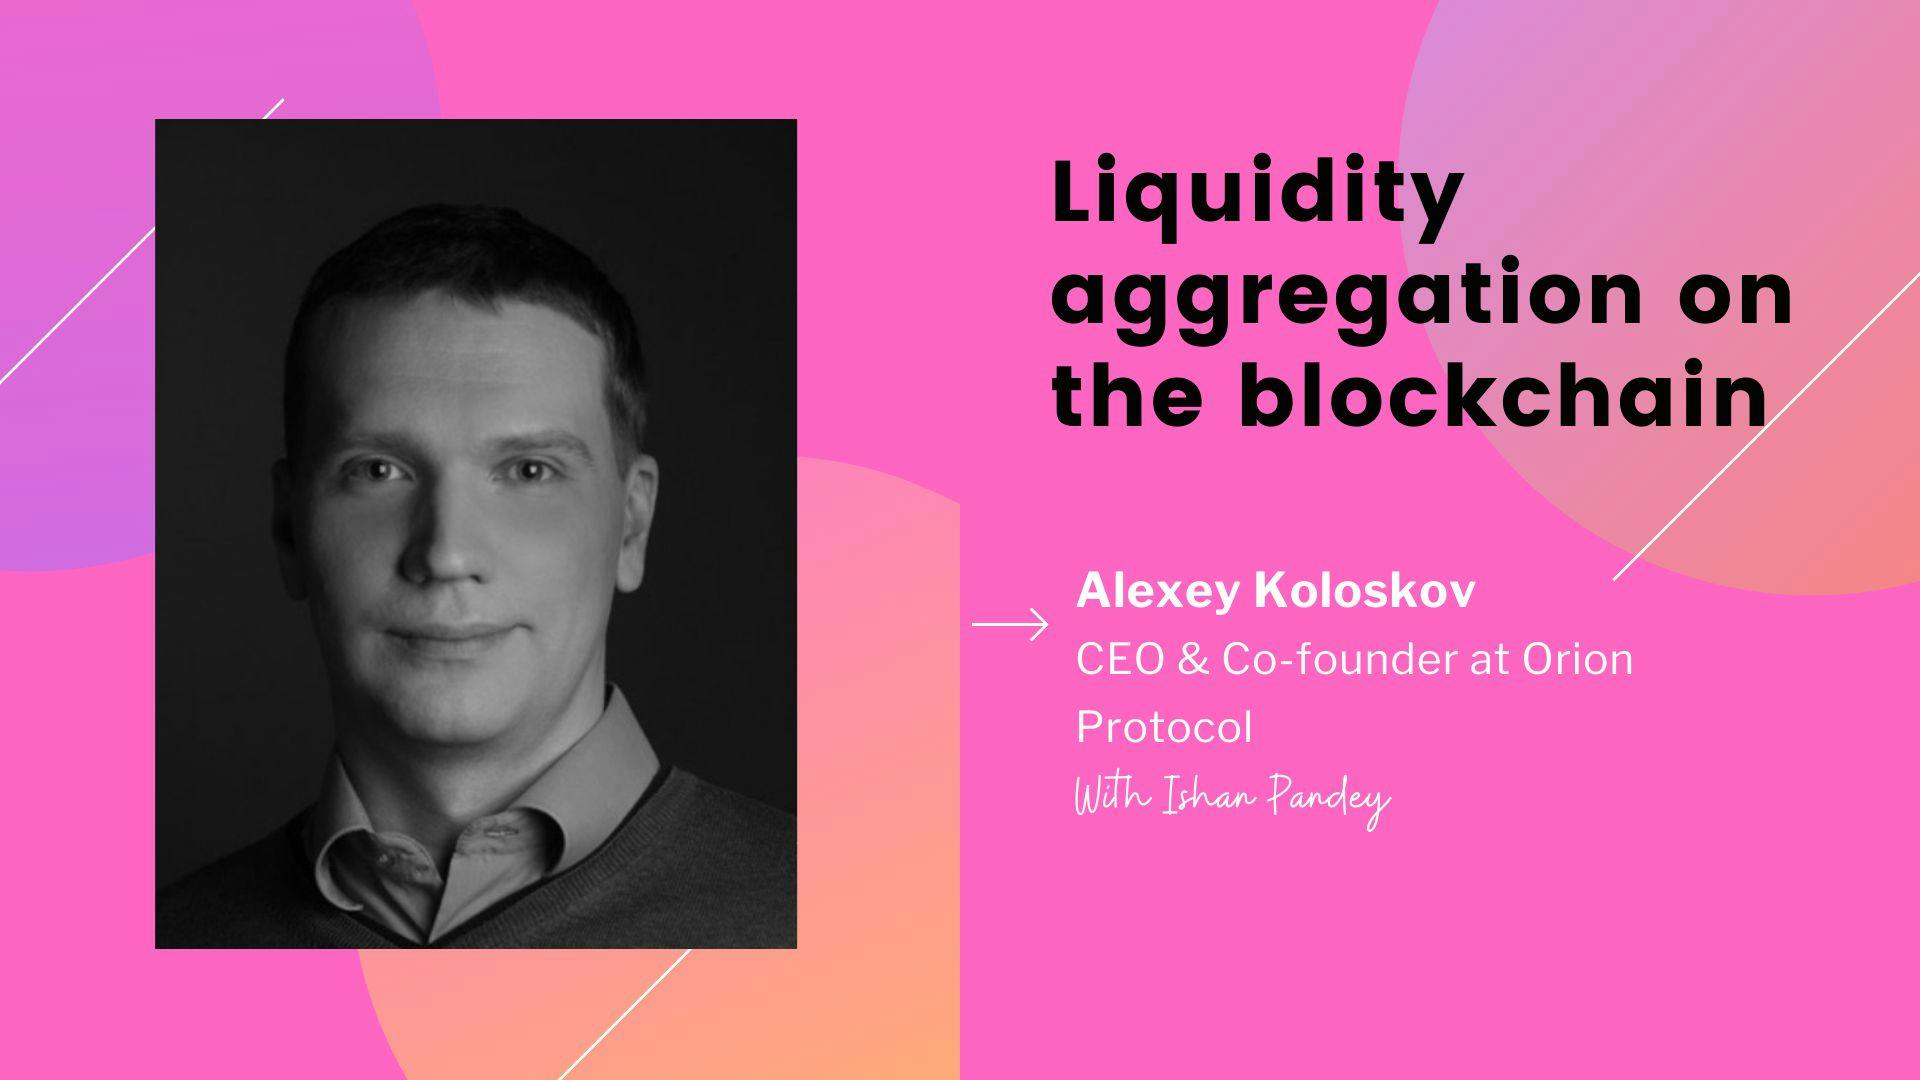 featured image - Liquidity aggregation and farming on blockchain with Alexey Koloskov